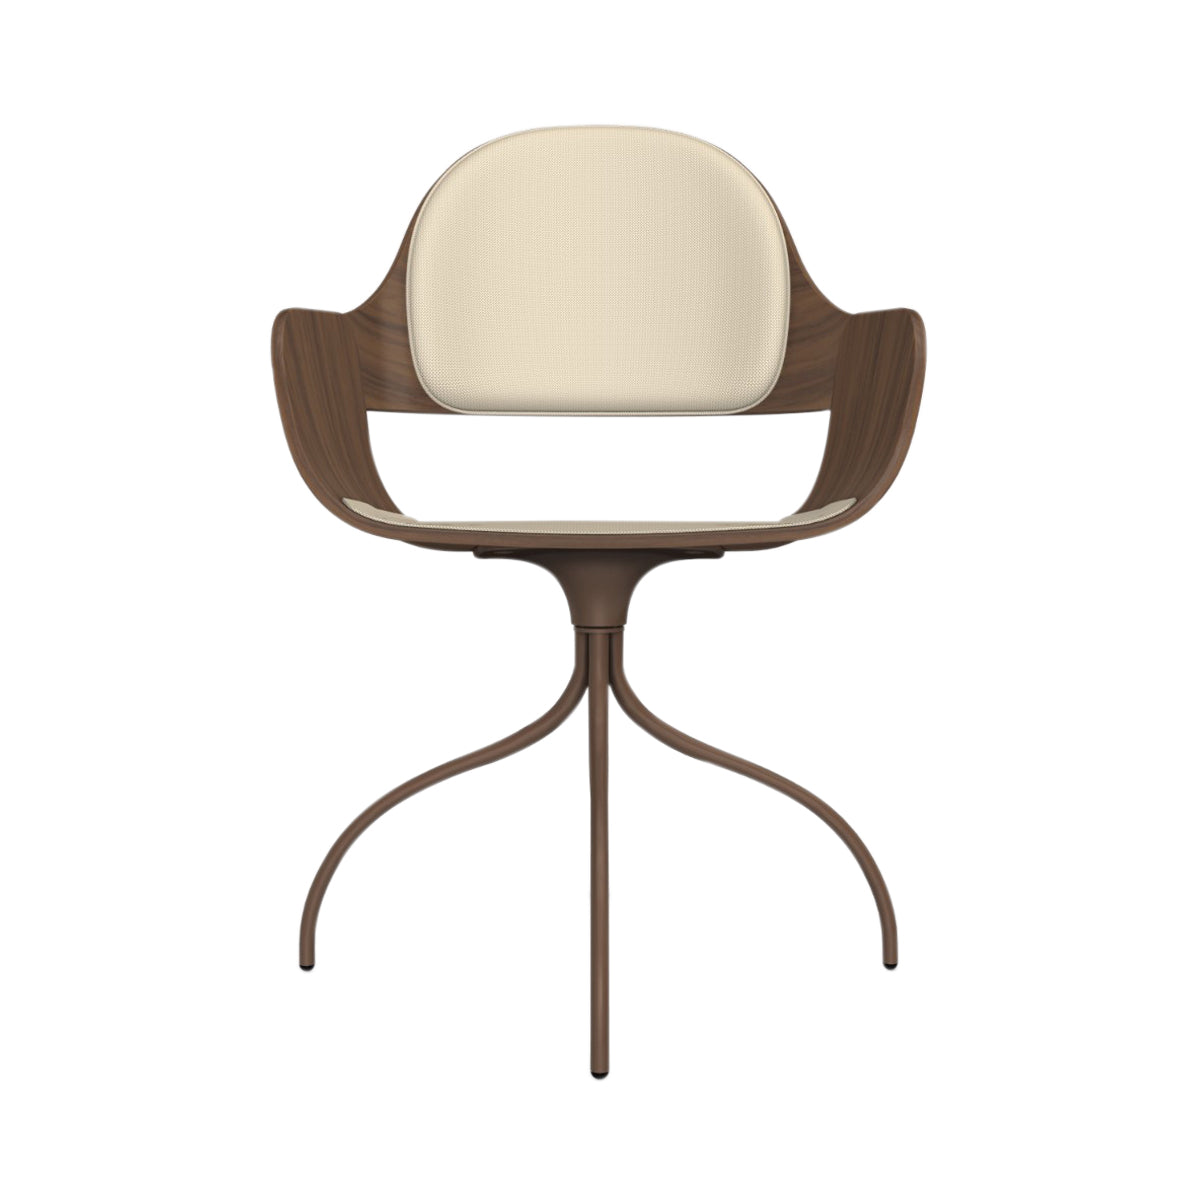 Showtime Nude Chair with Swivel Base: Seat + Backrest Cushion + Walnut + Pale Brown